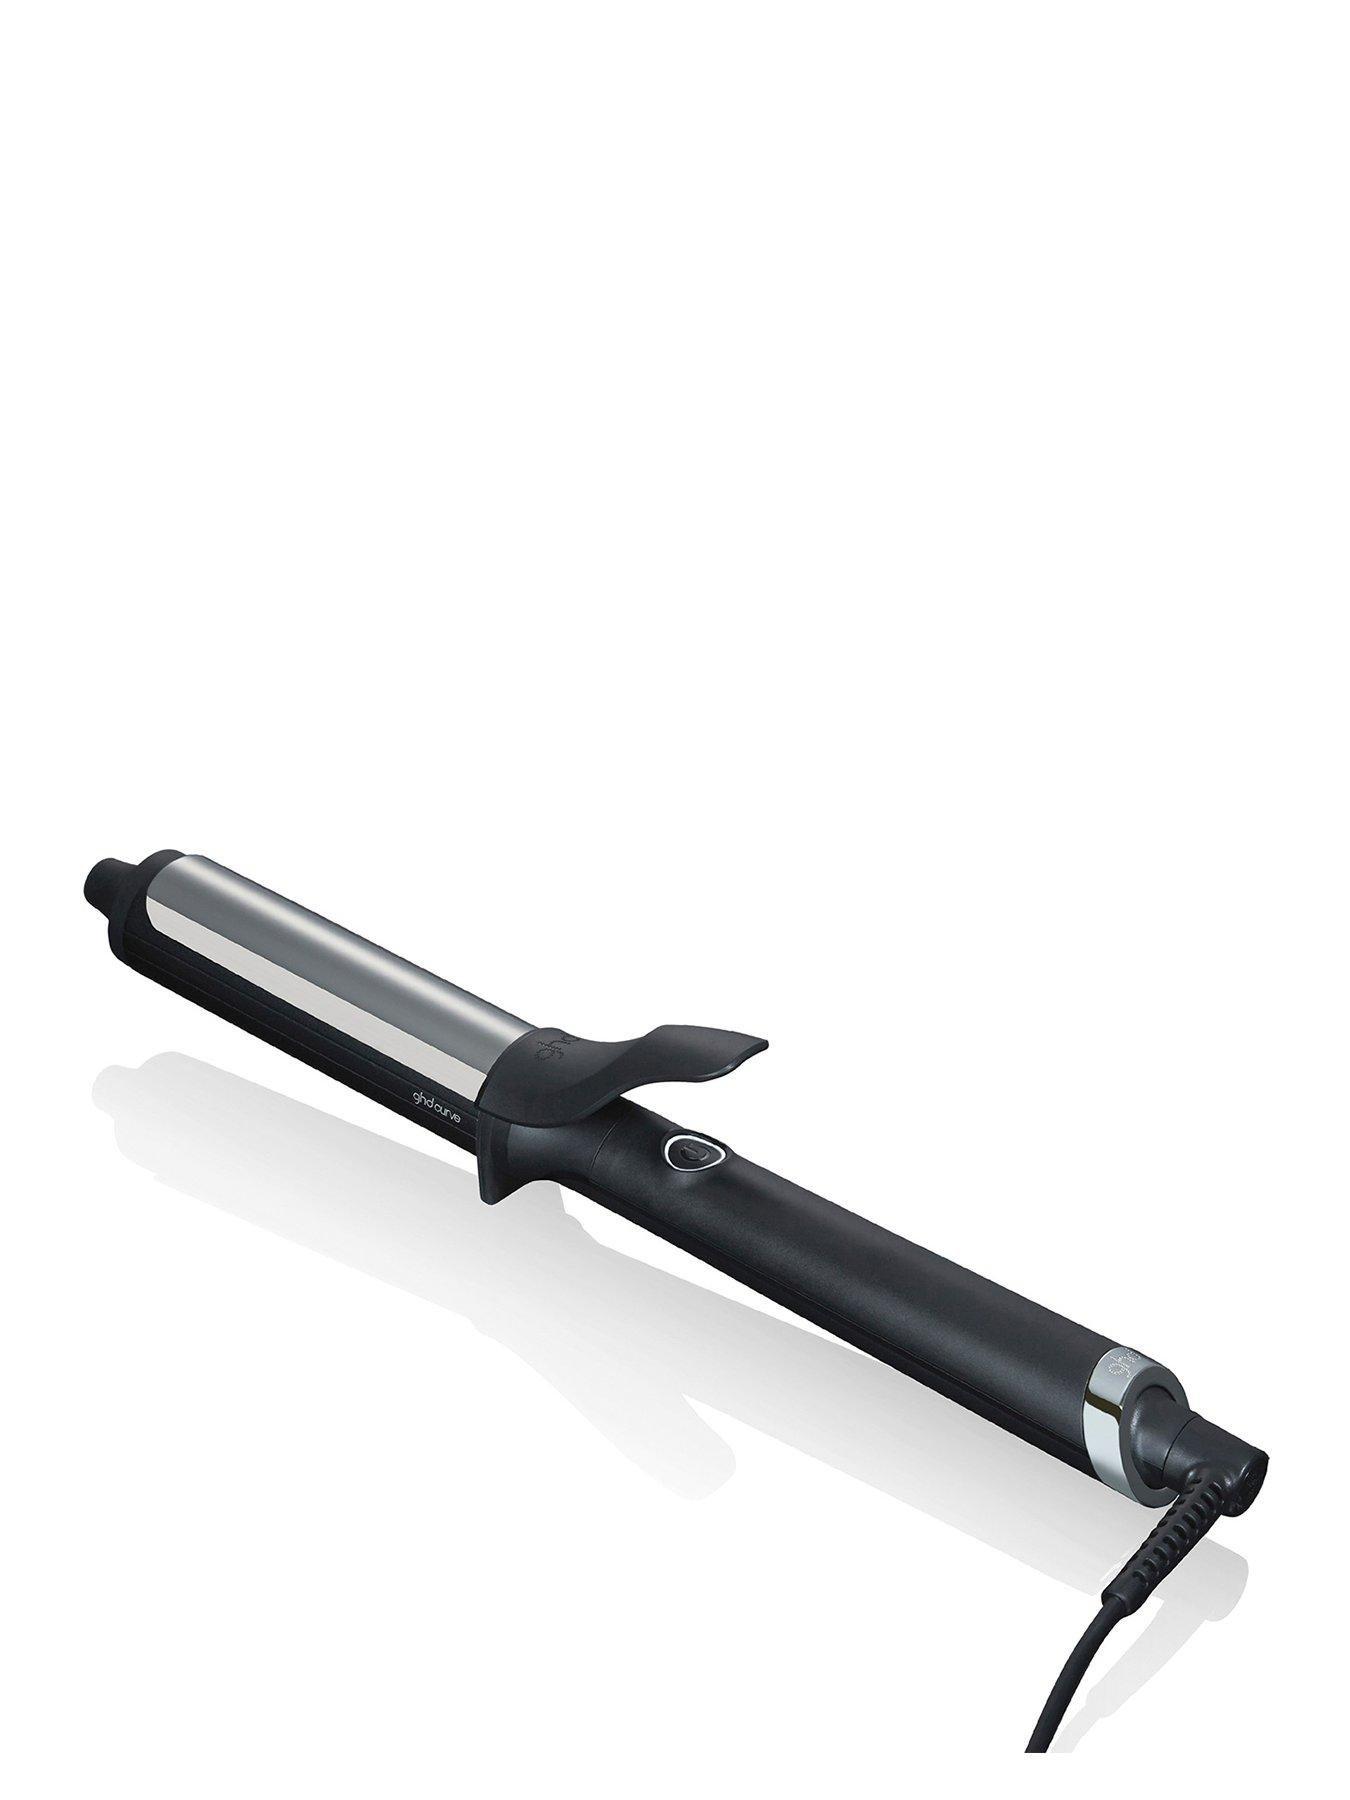  ghd Chronos Styler ― 1 Hair Straightener, 3X Faster HD  Motion-Responsive Styler for One Stroke High-Definition Results that Last  24hrs, 85% More Shine, 2X Less Frizz, No Heat Damage ― White 